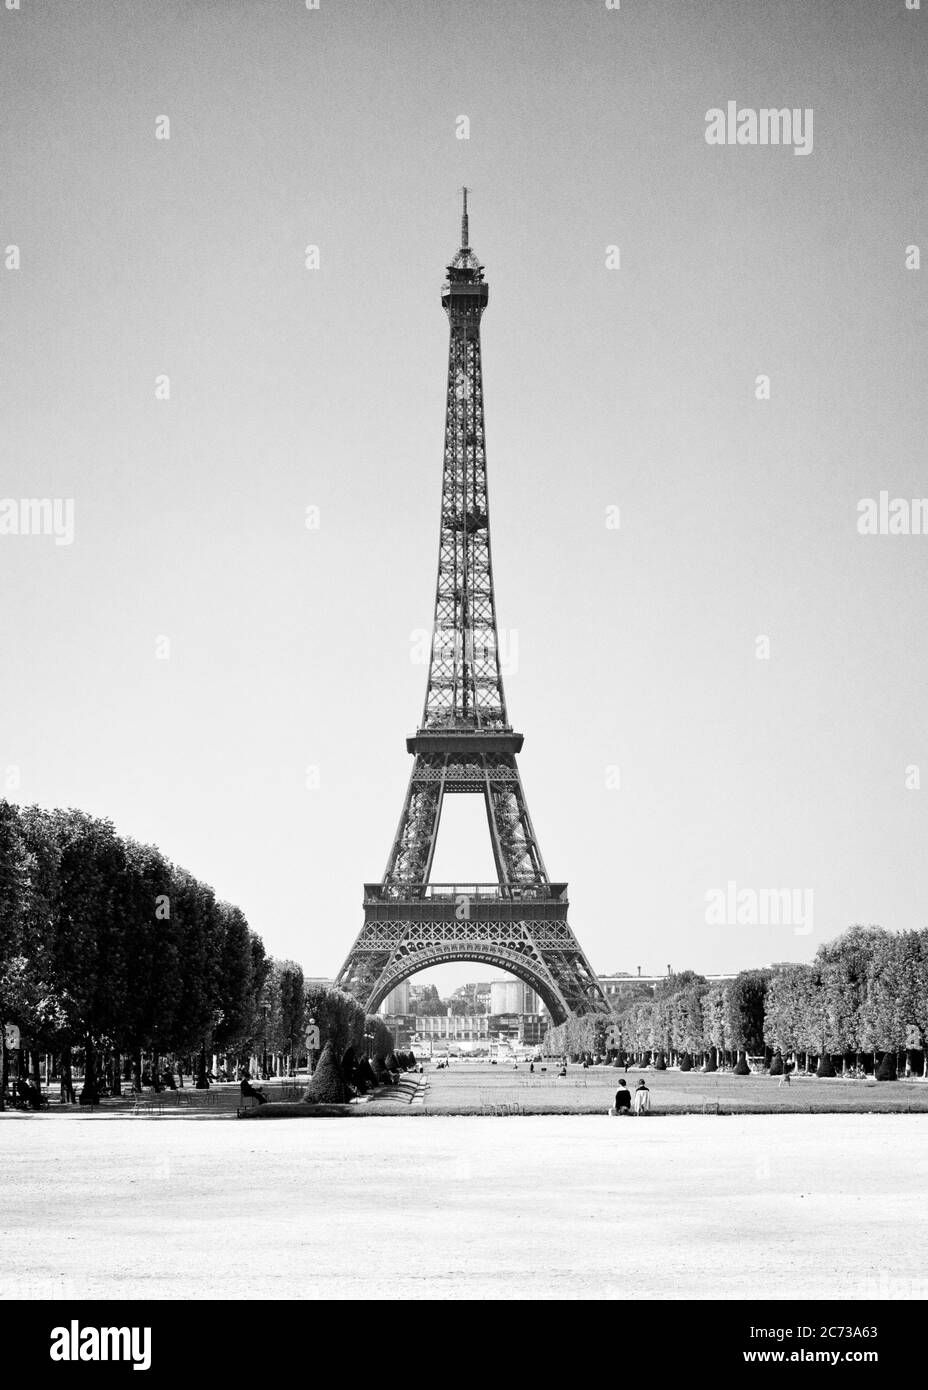 1960s EIFFEL TOWER WROUGHT IRON LATTICE STRUCTURE IN THE CHAMP DE MARS BUILT IN THE 1880s AS ENTRANCE TO THE 1889 WORLD’S FAIR - r18903 HAR001 HARS CHAMP CHAMP DE MARS SYMBOLIC BUILT CONCEPTS CREATIVITY MARS TOURIST ATTRACTION WROUGHT BLACK AND WHITE HAR001 ICONIC LANDMARK OLD FASHIONED REPRESENTATION Stock Photo